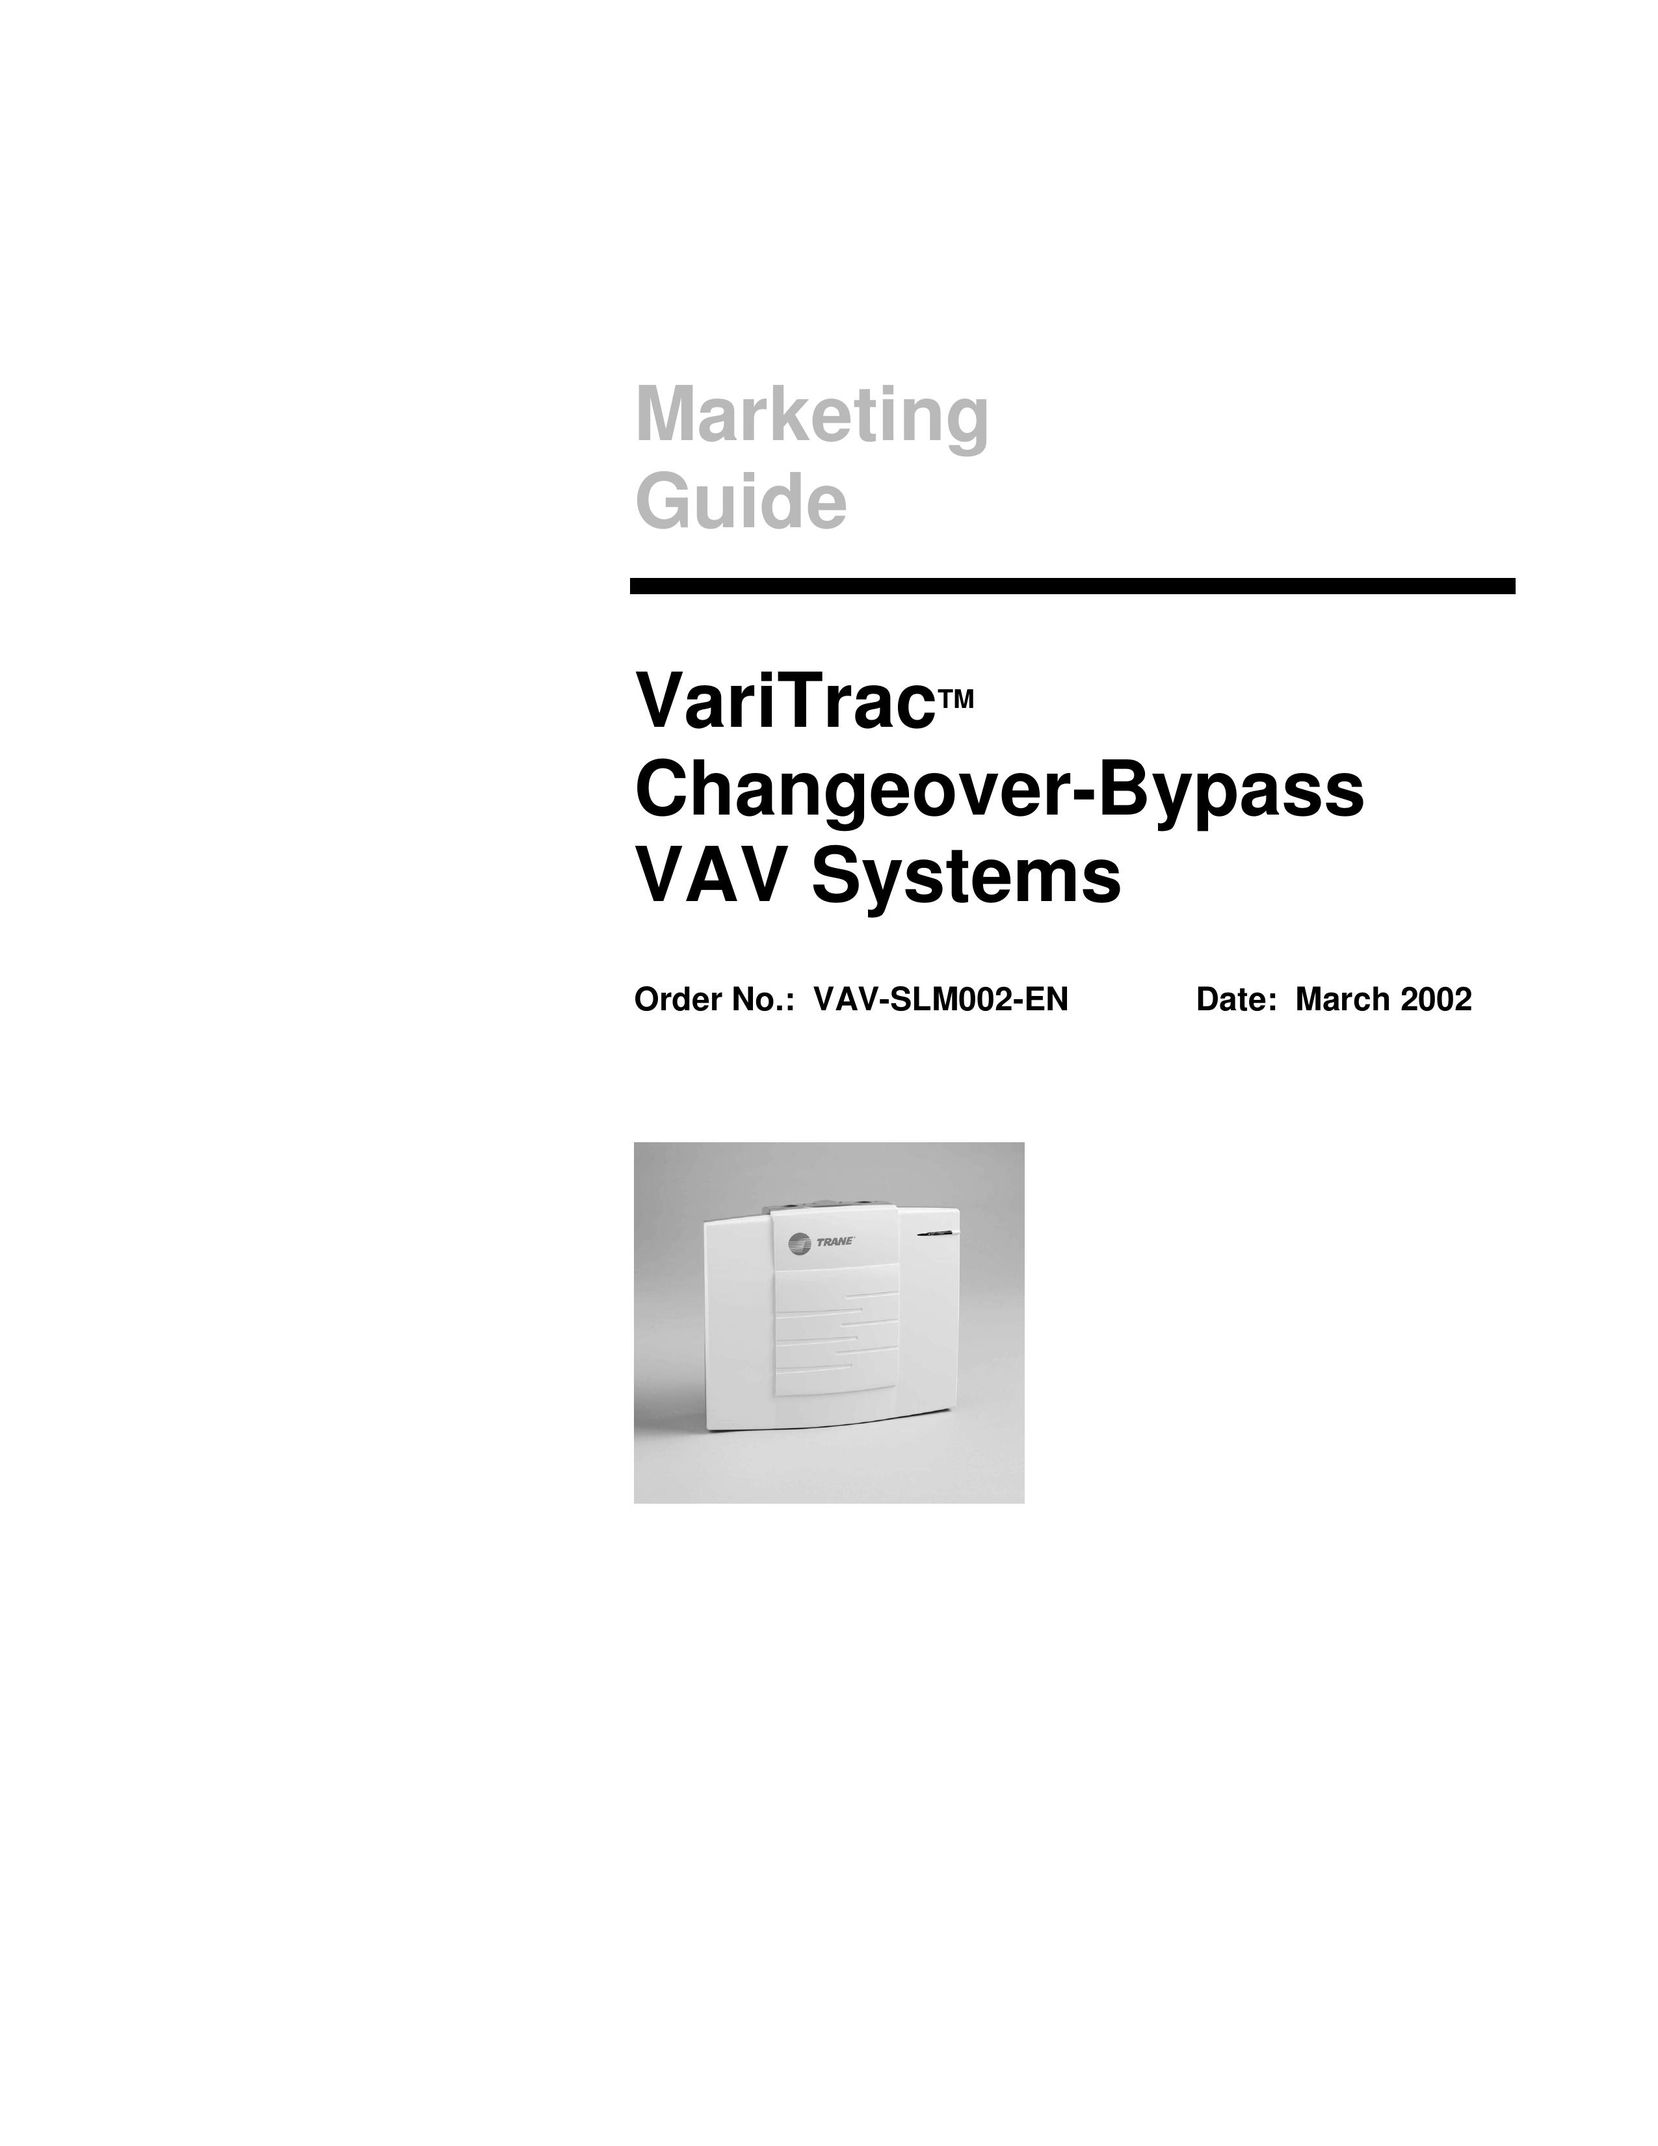 Trane VariTrac Changeover-Bypass VAV Systems Thermostat User Manual